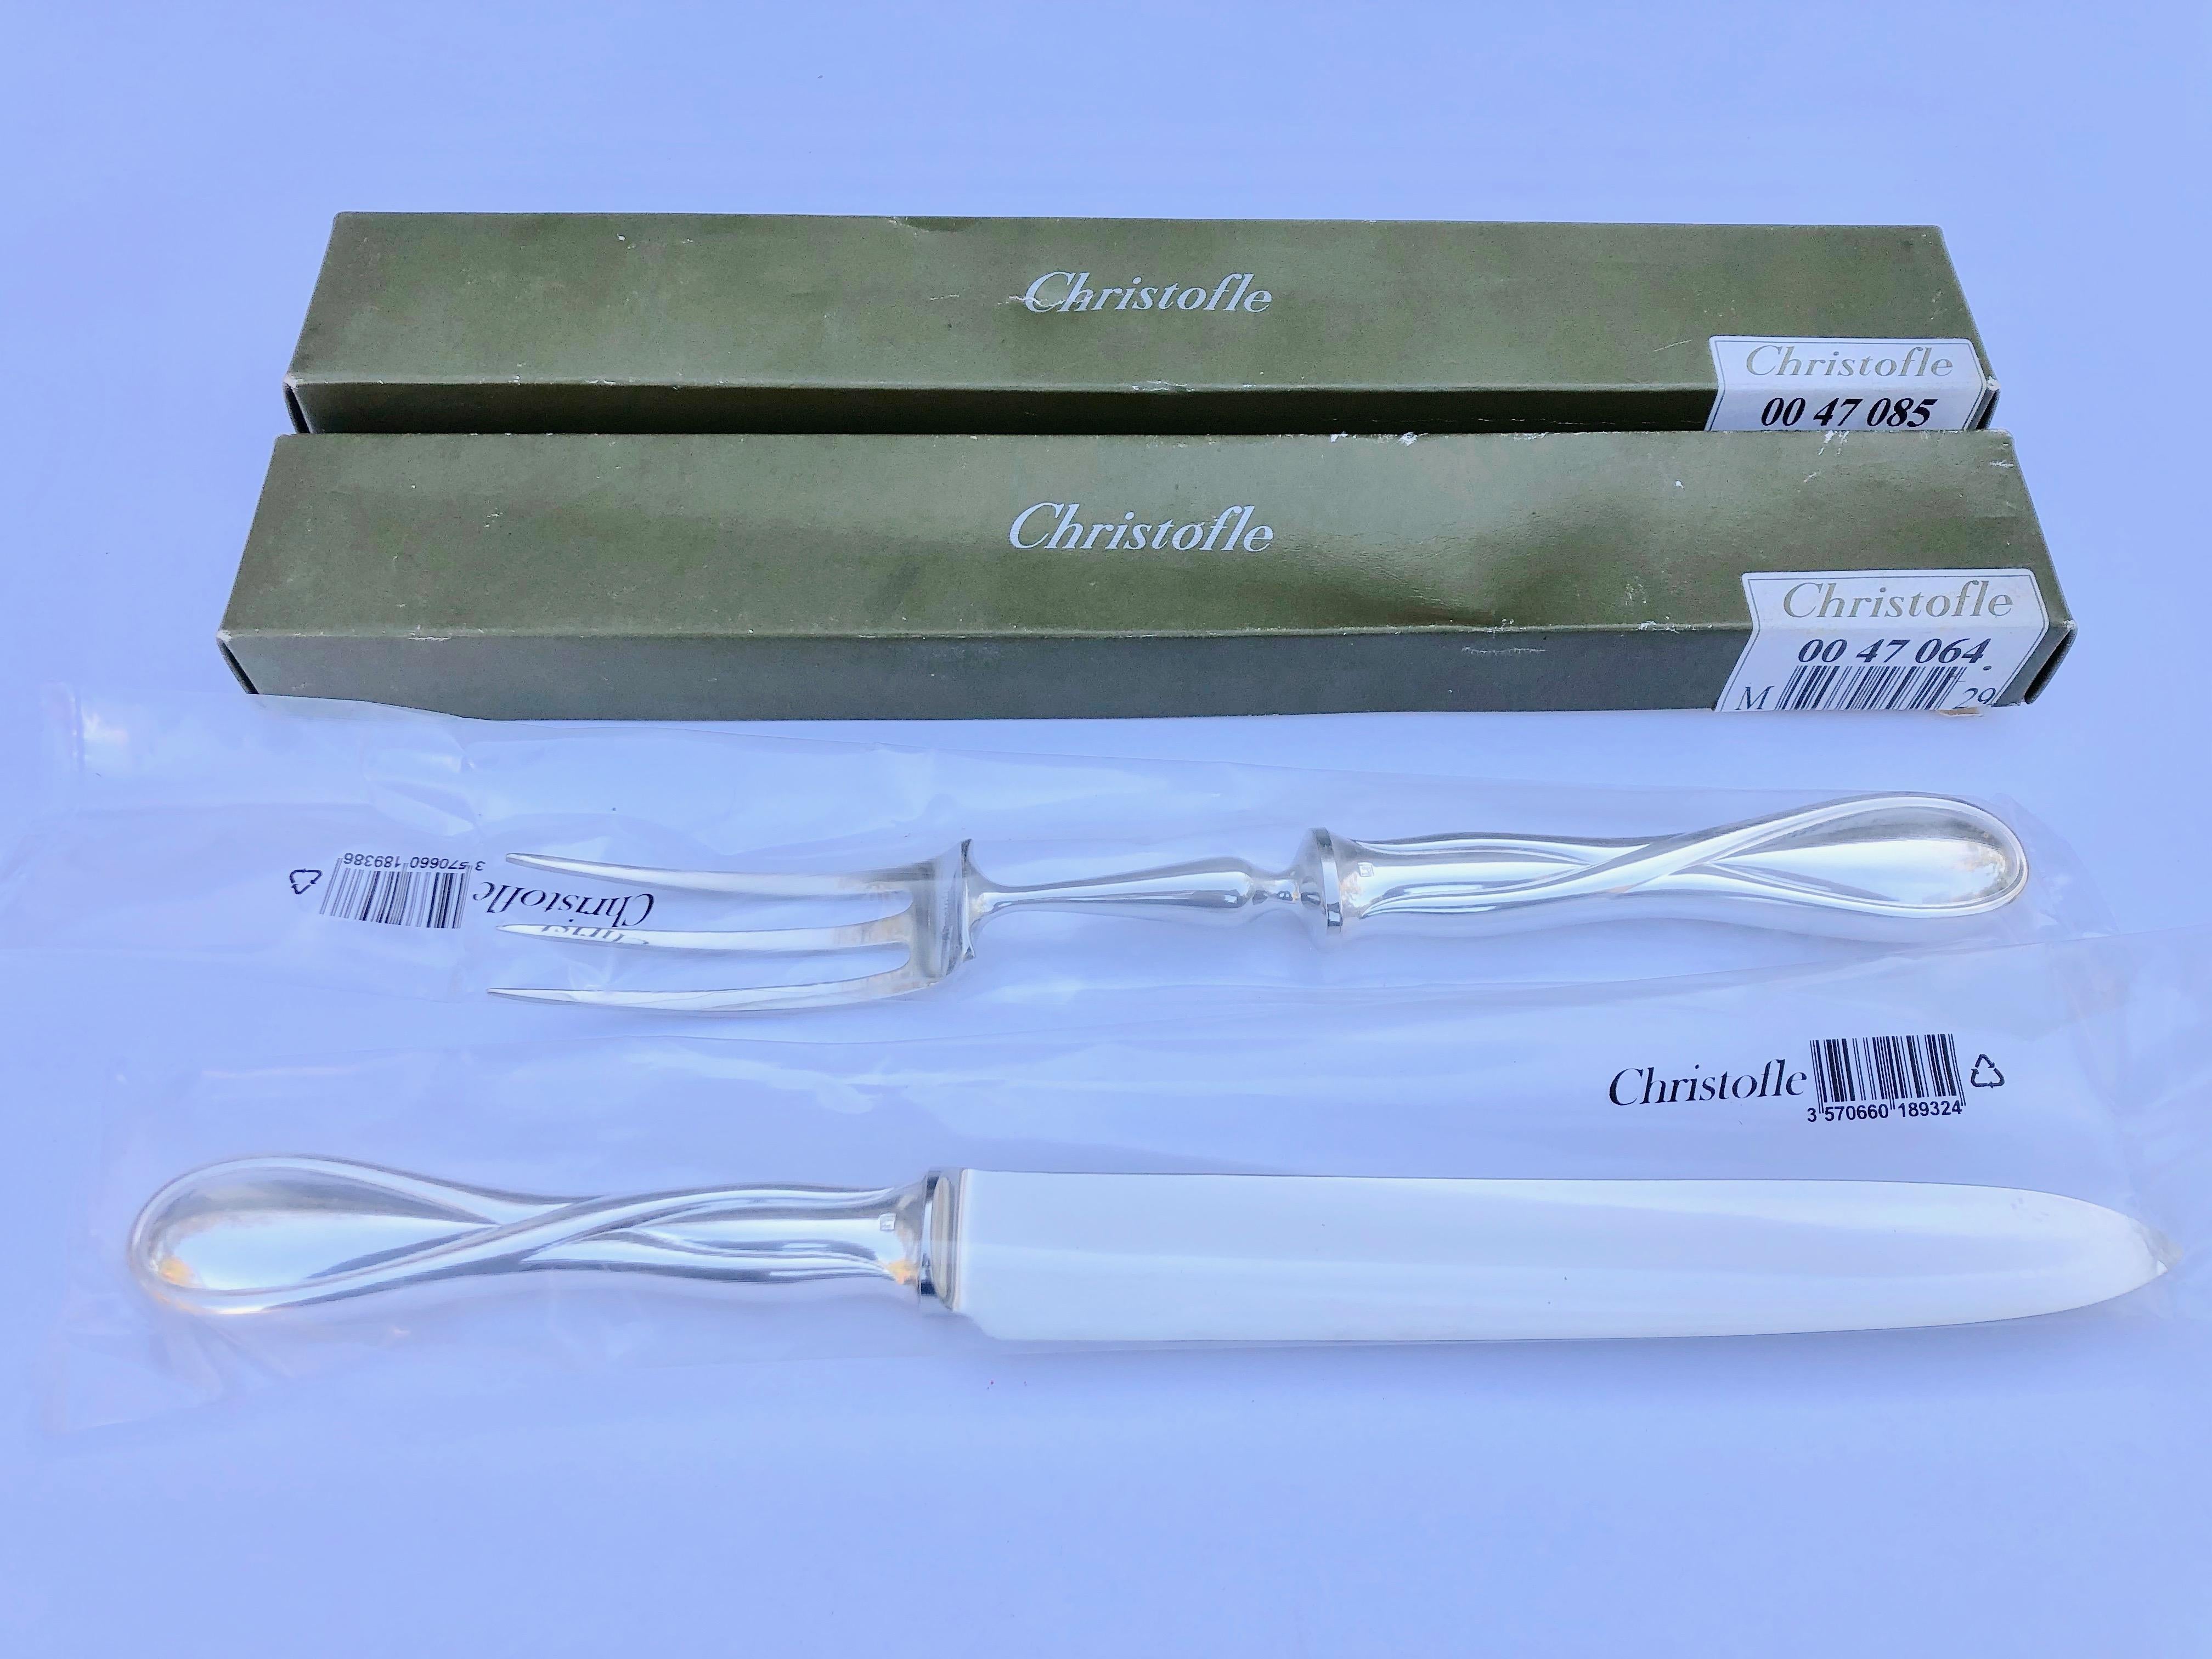 This is a beautiful French silver plated Christofle Galea carving fork and knife set. Both pieces are new, never used and under their original plastic pouches.

Launched in 2000, the Galéa flatware collection features designer Bernard Yot’s